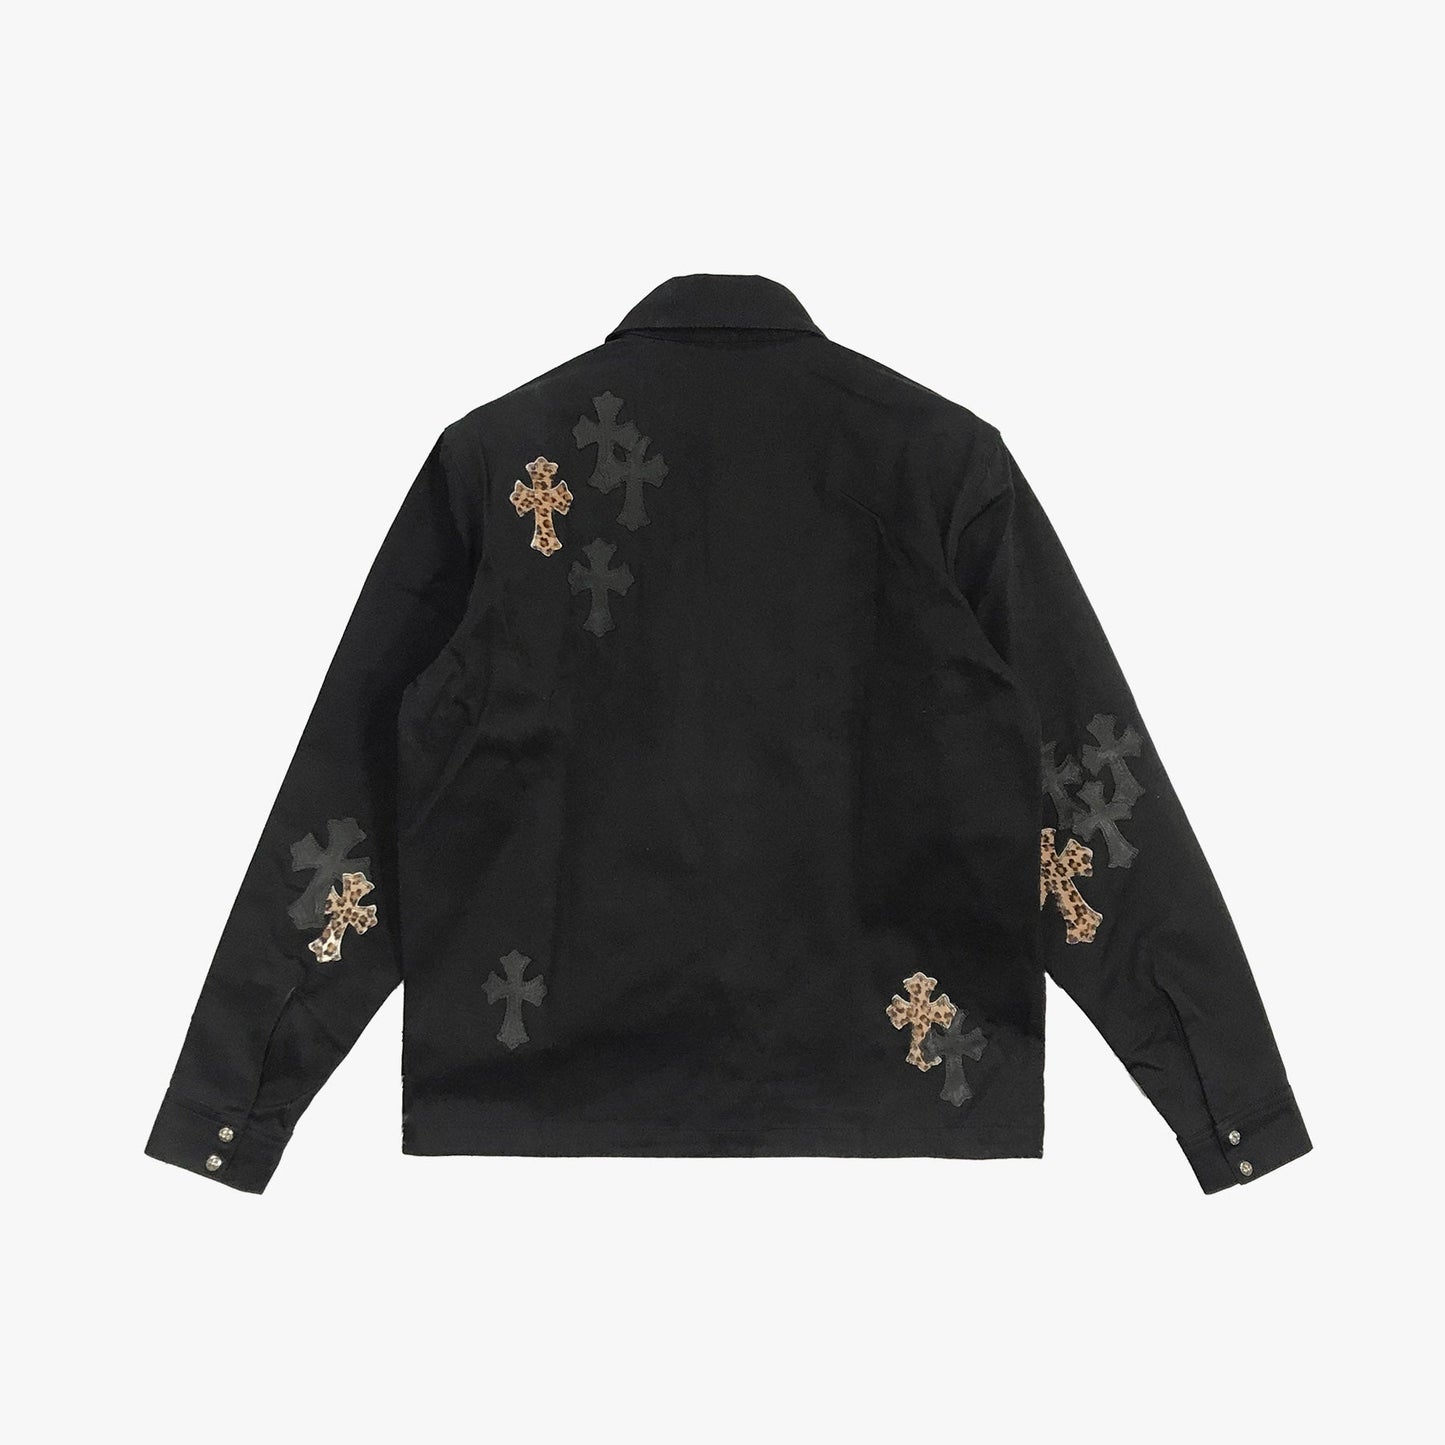 Chrome Hearts Work Dog Leopard Pattern Leather Cross Patch Shirt Jacket with Silver Buttons - SHENGLI ROAD MARKET